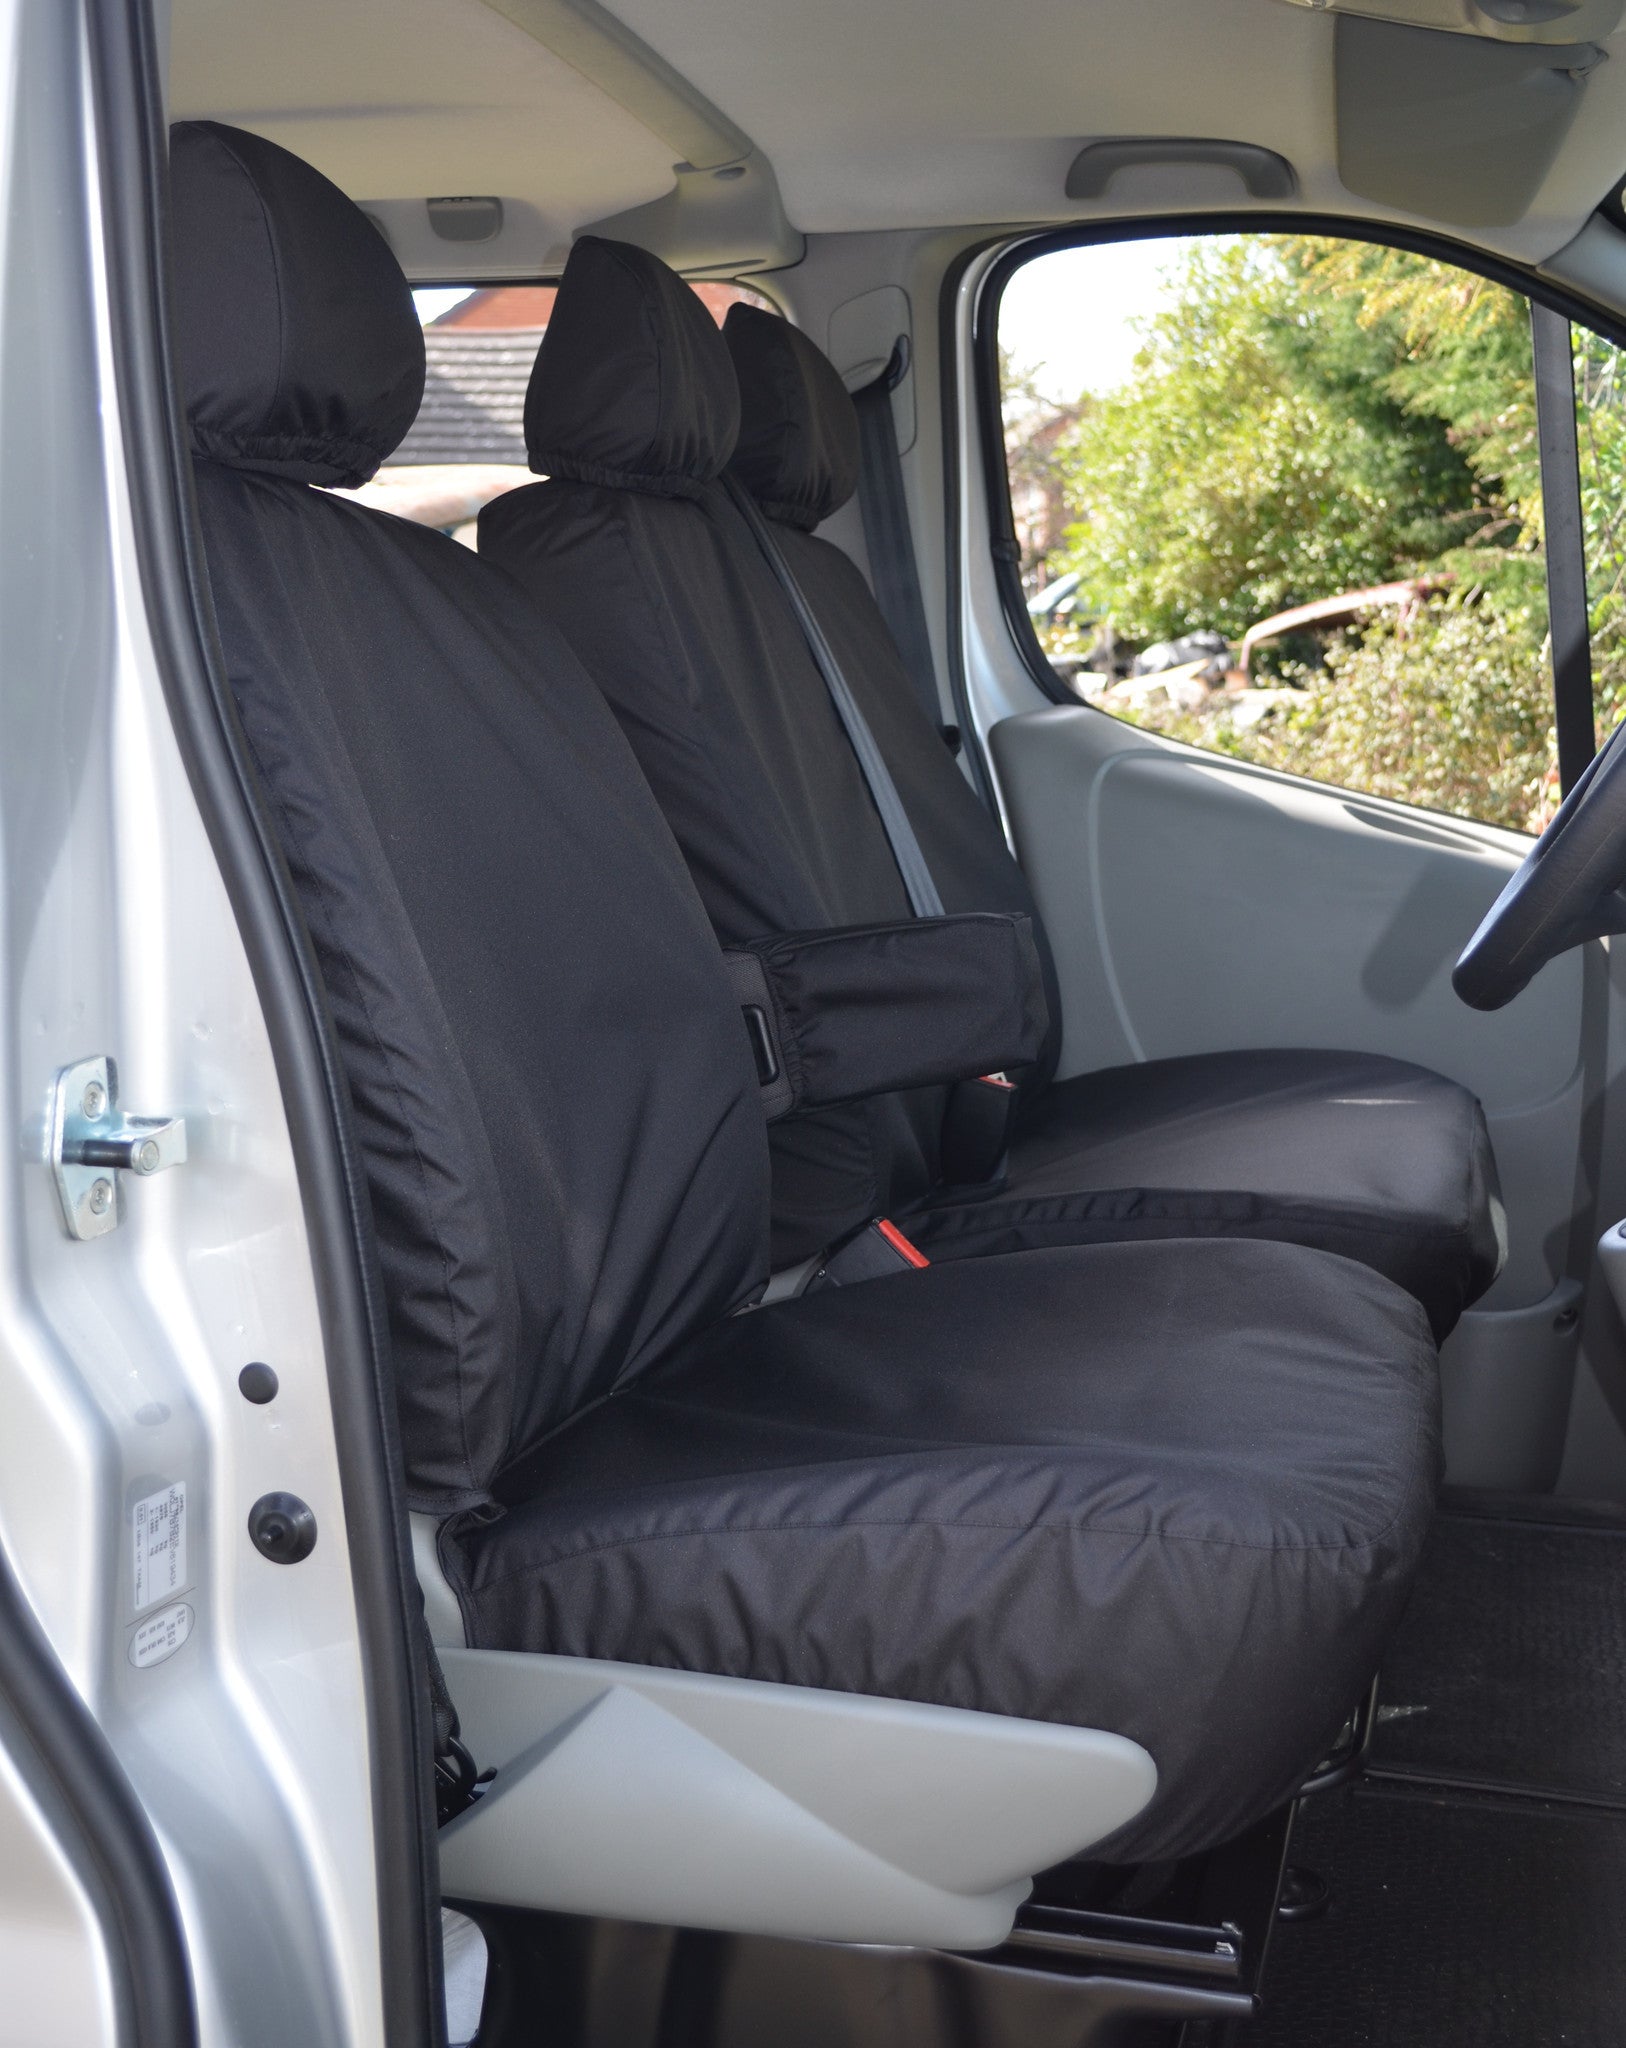 Vauxhall Vivaro 2001 to 2006 Tailored Front Seat Covers Black / With Driver's Armrest Turtle Covers Ltd